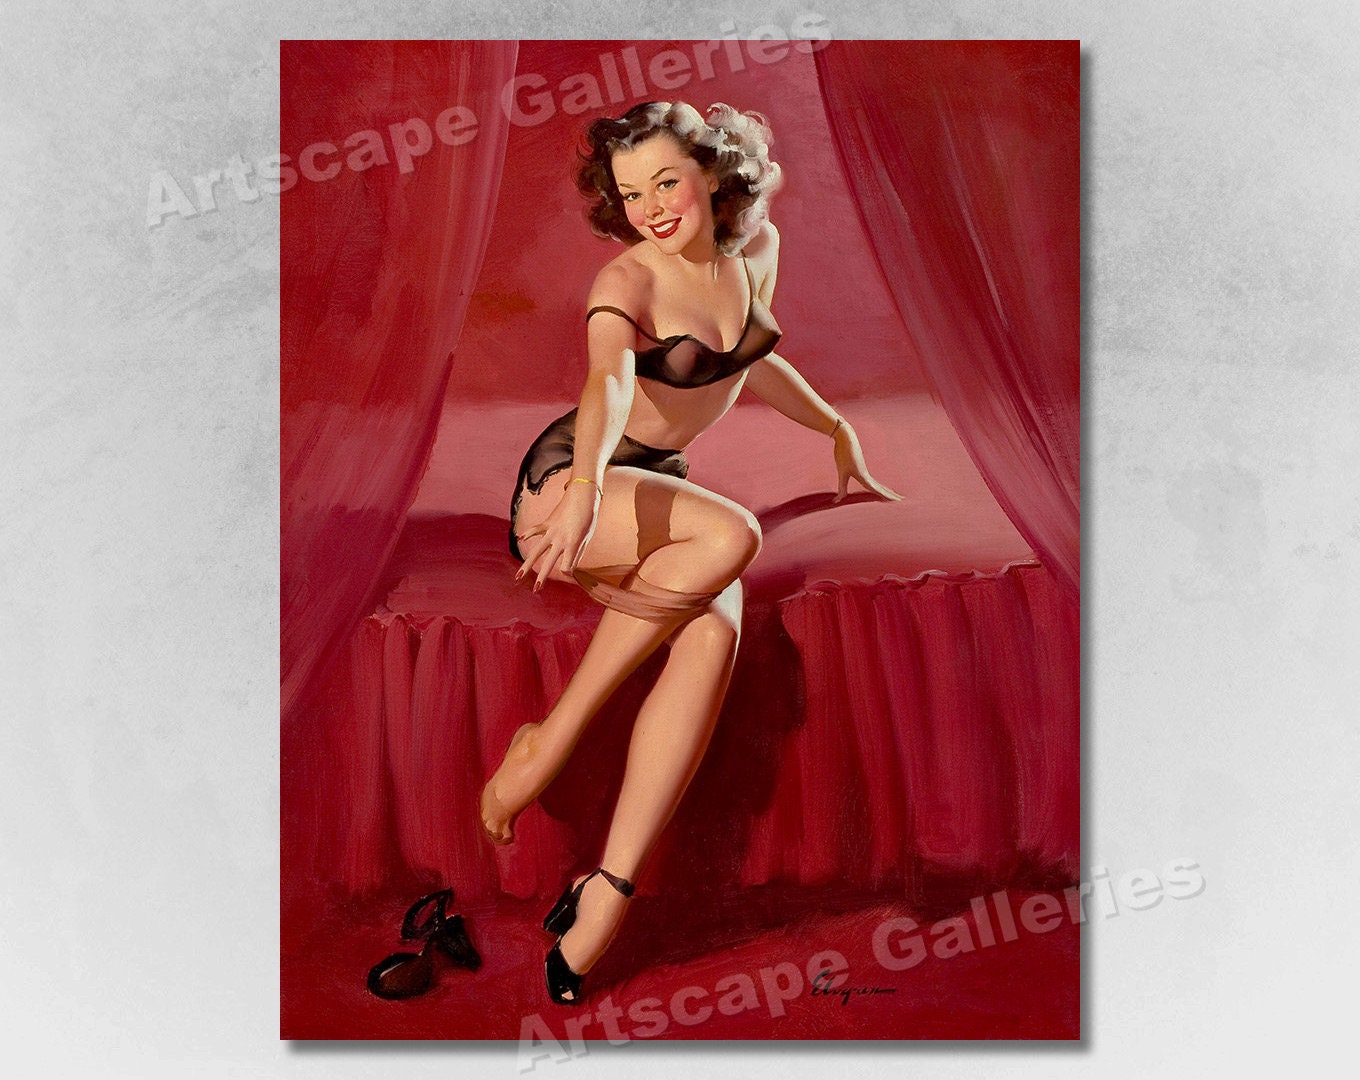 Sexy Cute Pin Up Girl with a Lollipop Art Print by Shmallish